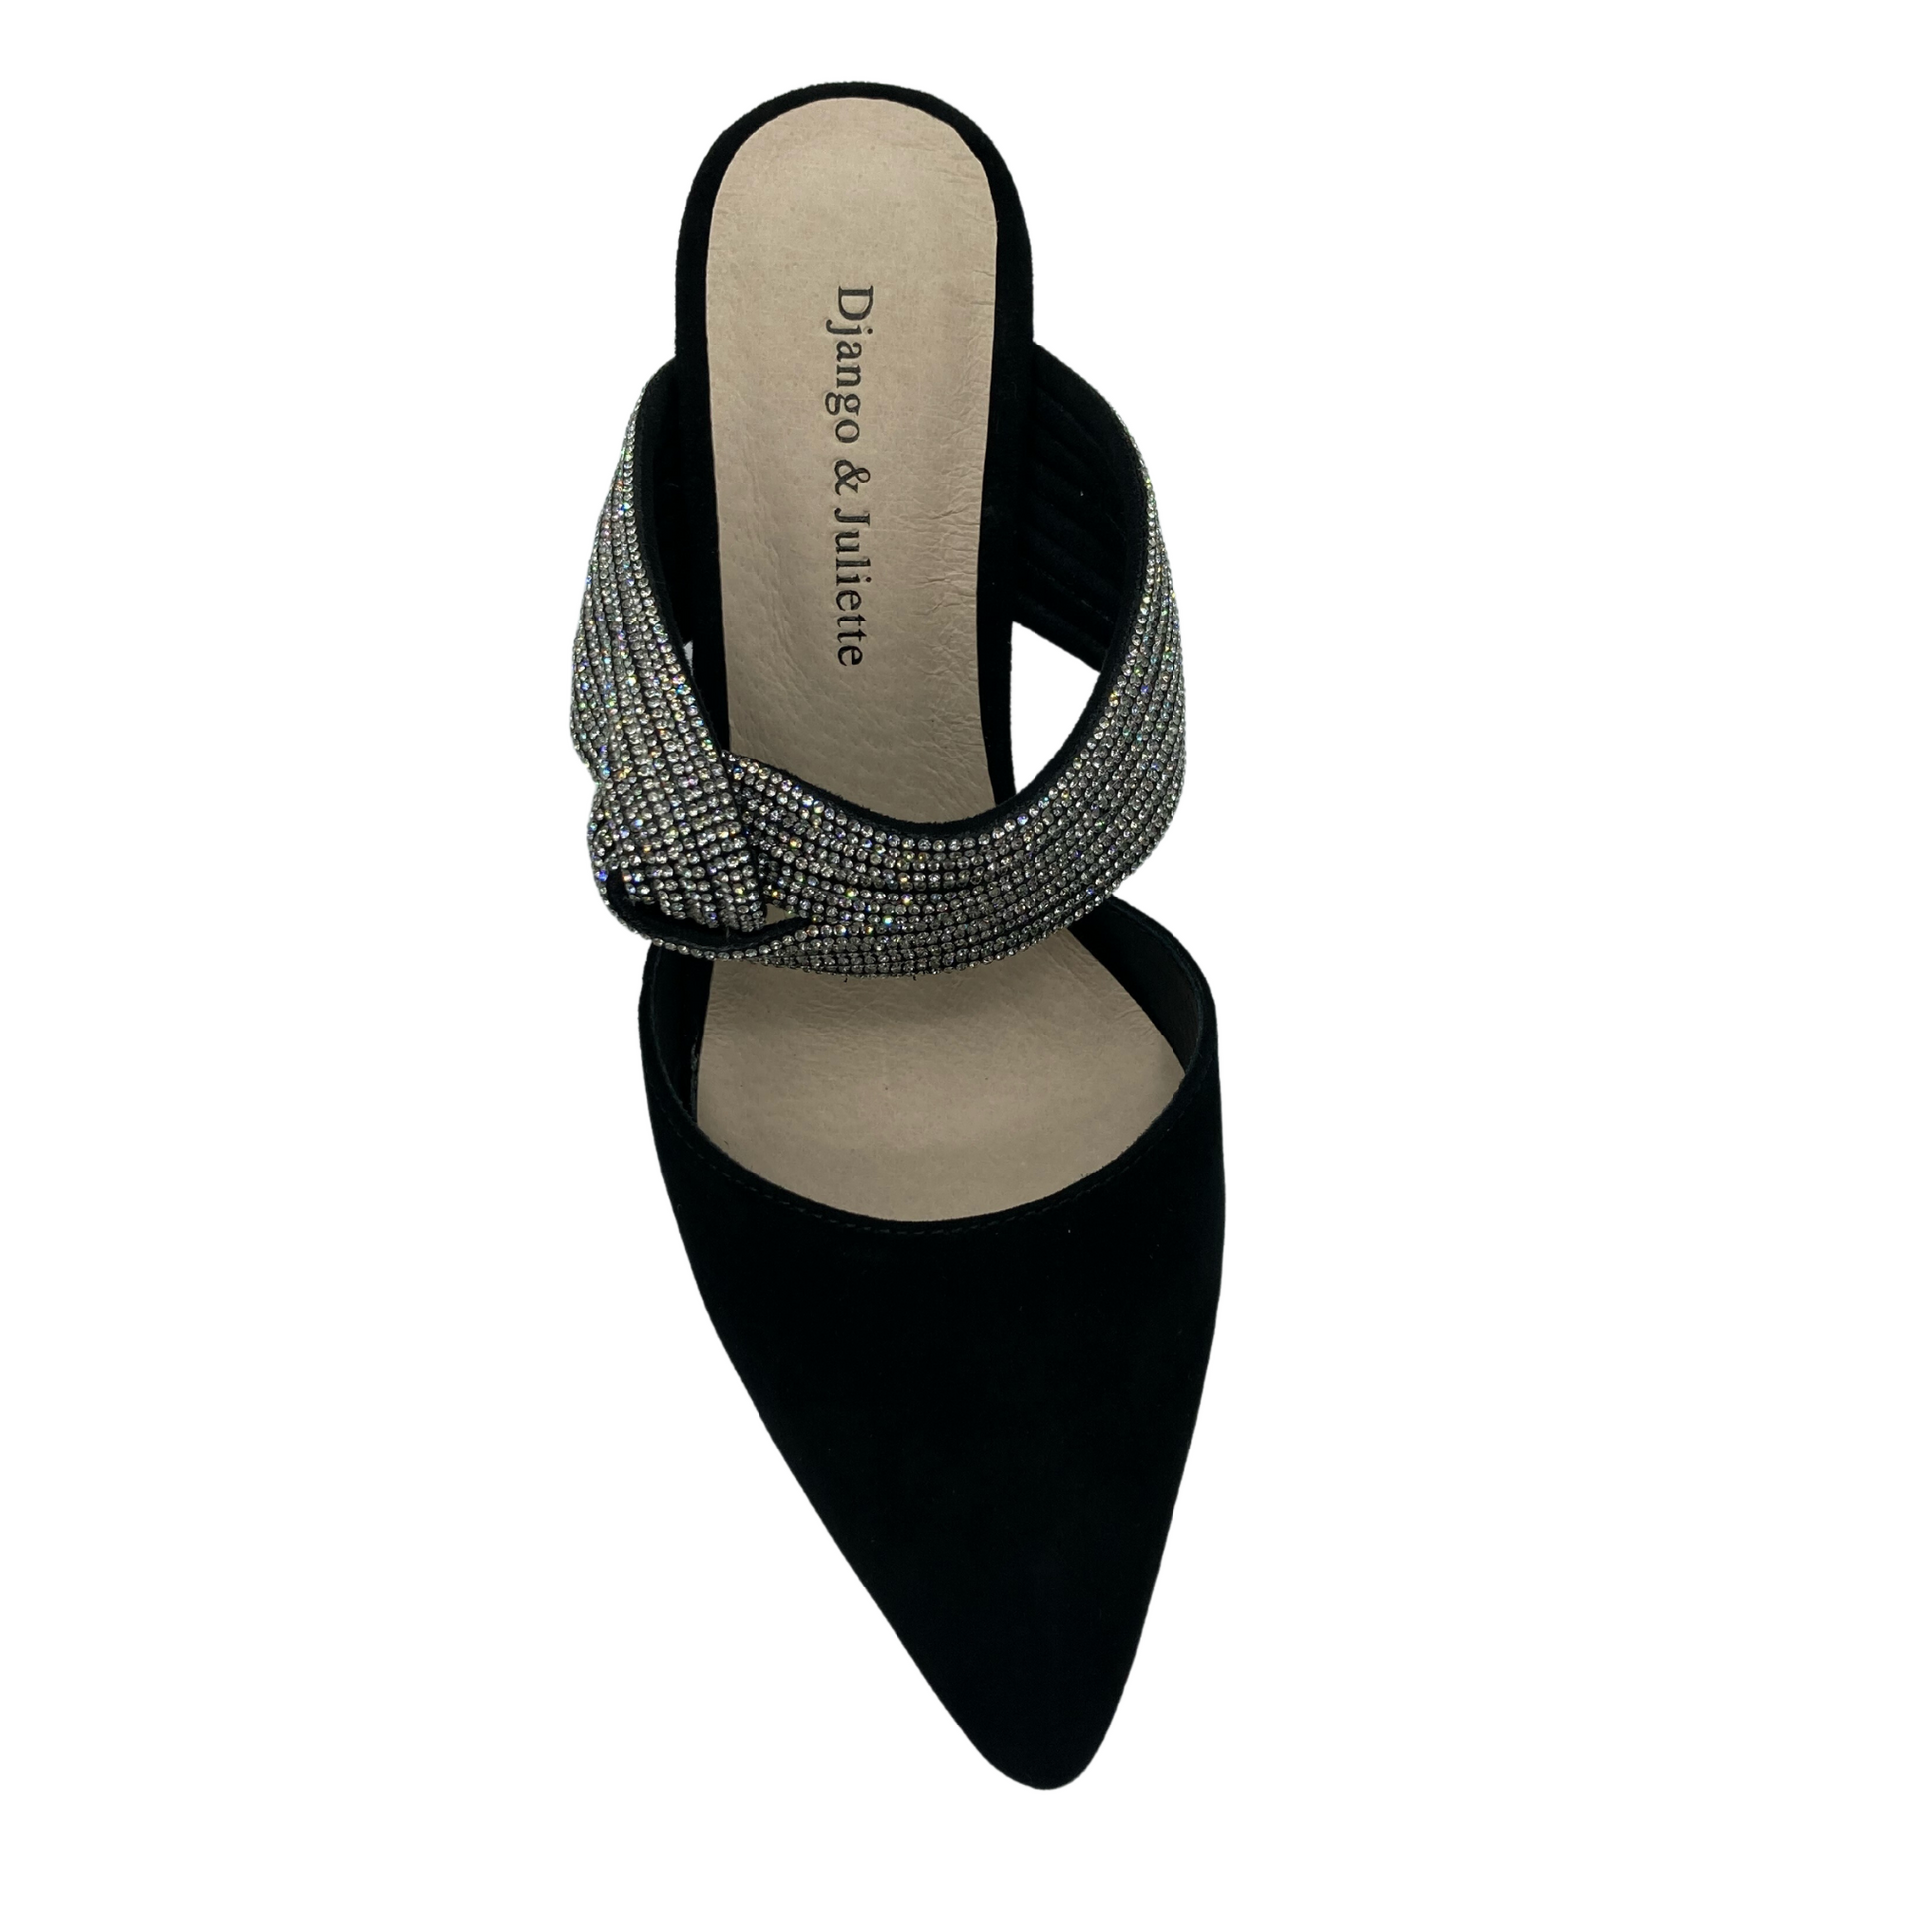 Top view of black suede heel with pointed toe and gem studded strap with knot detail